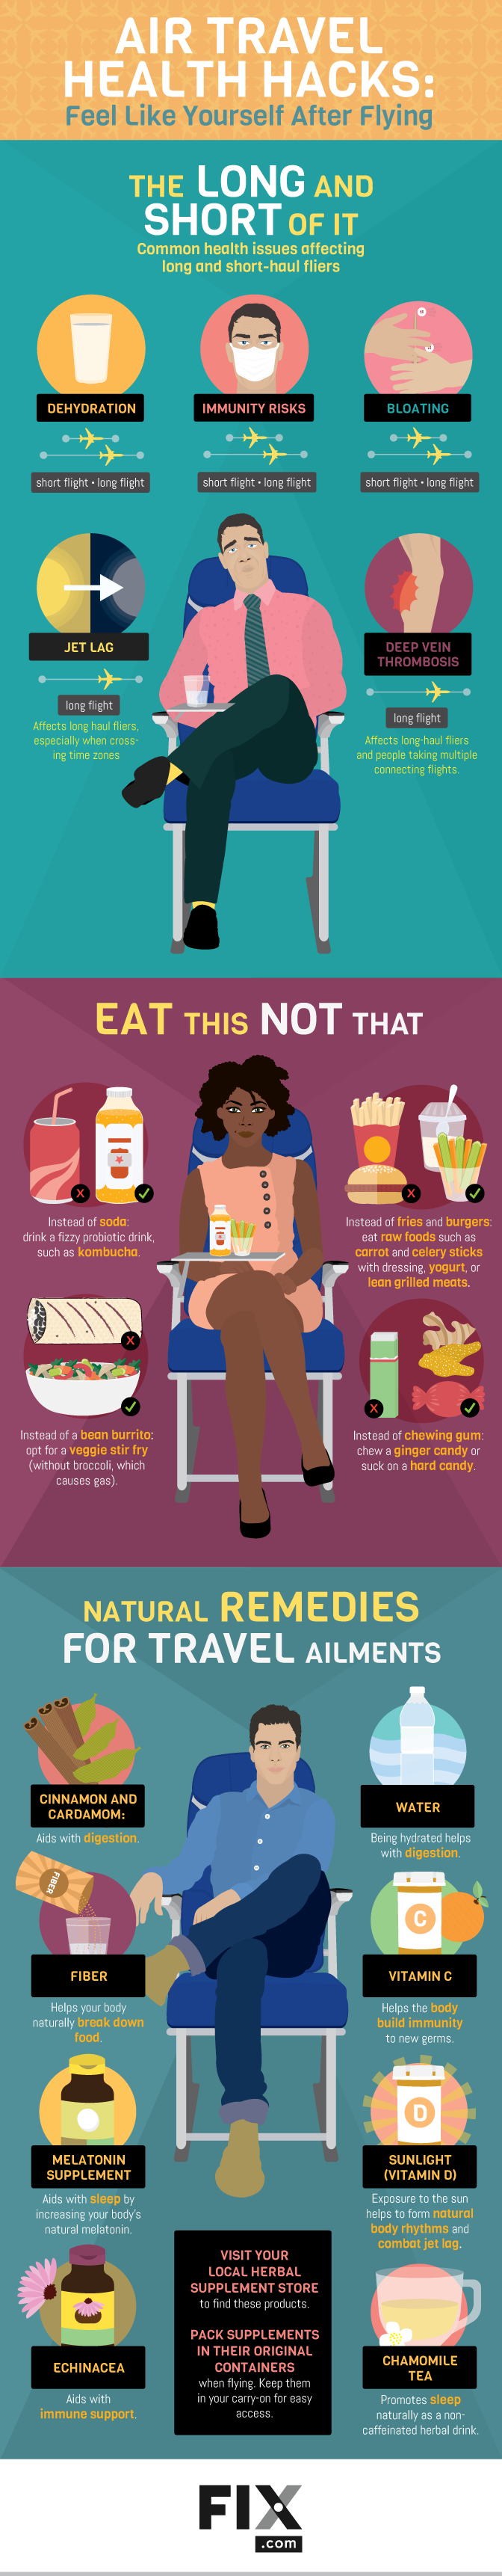 Make Your Air Travel Healthier With These Simple Hacks Infographic